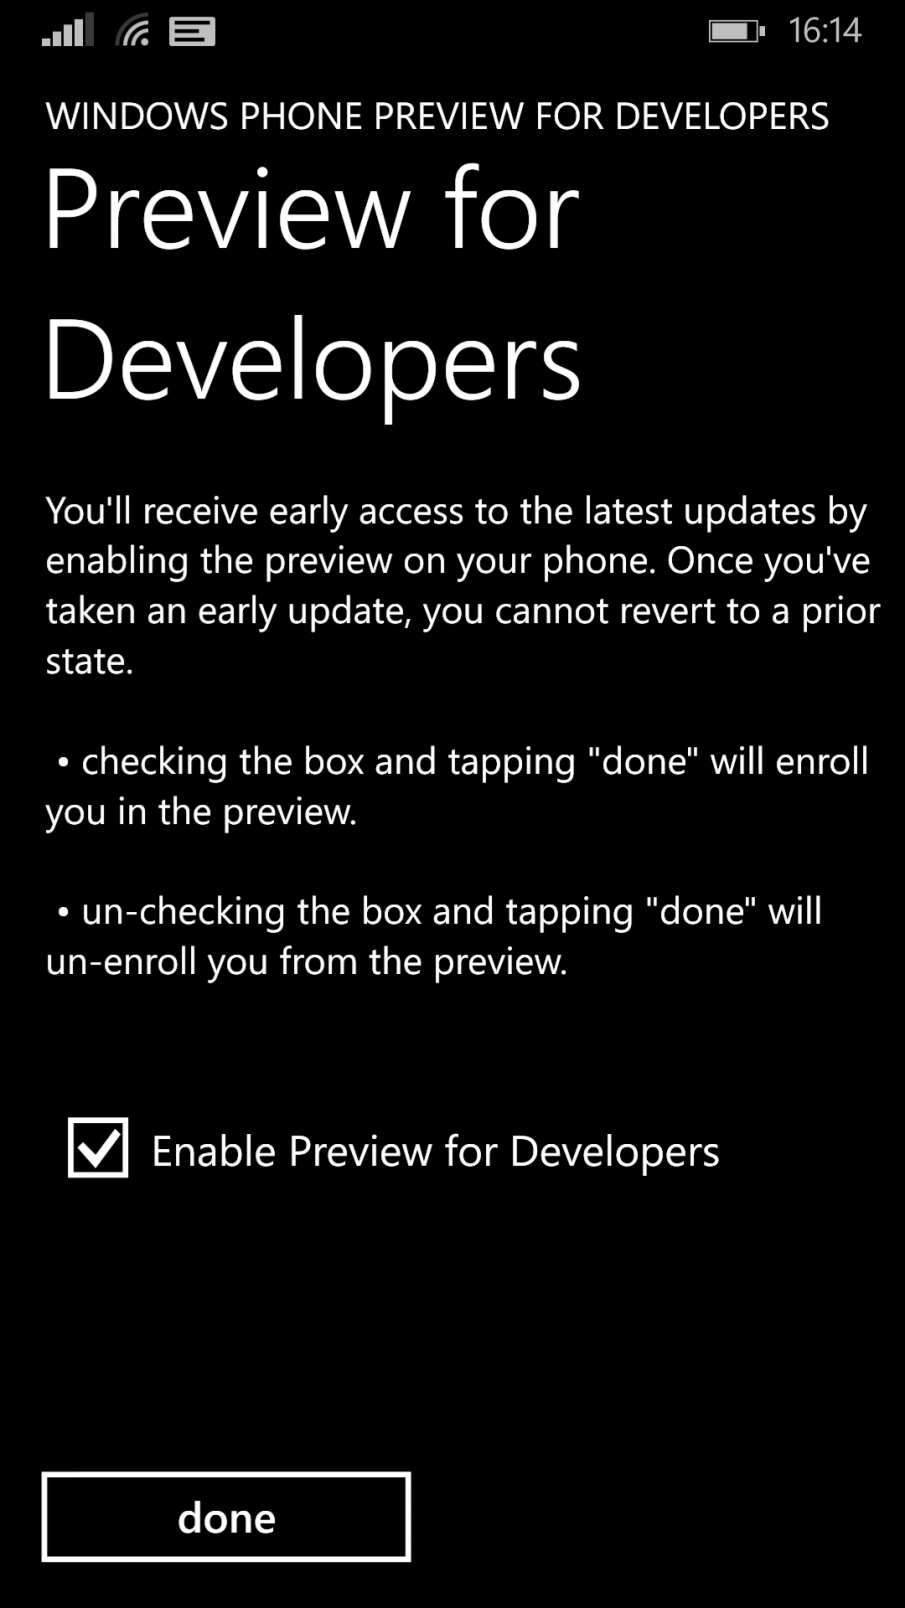 Preview for Developers: Check